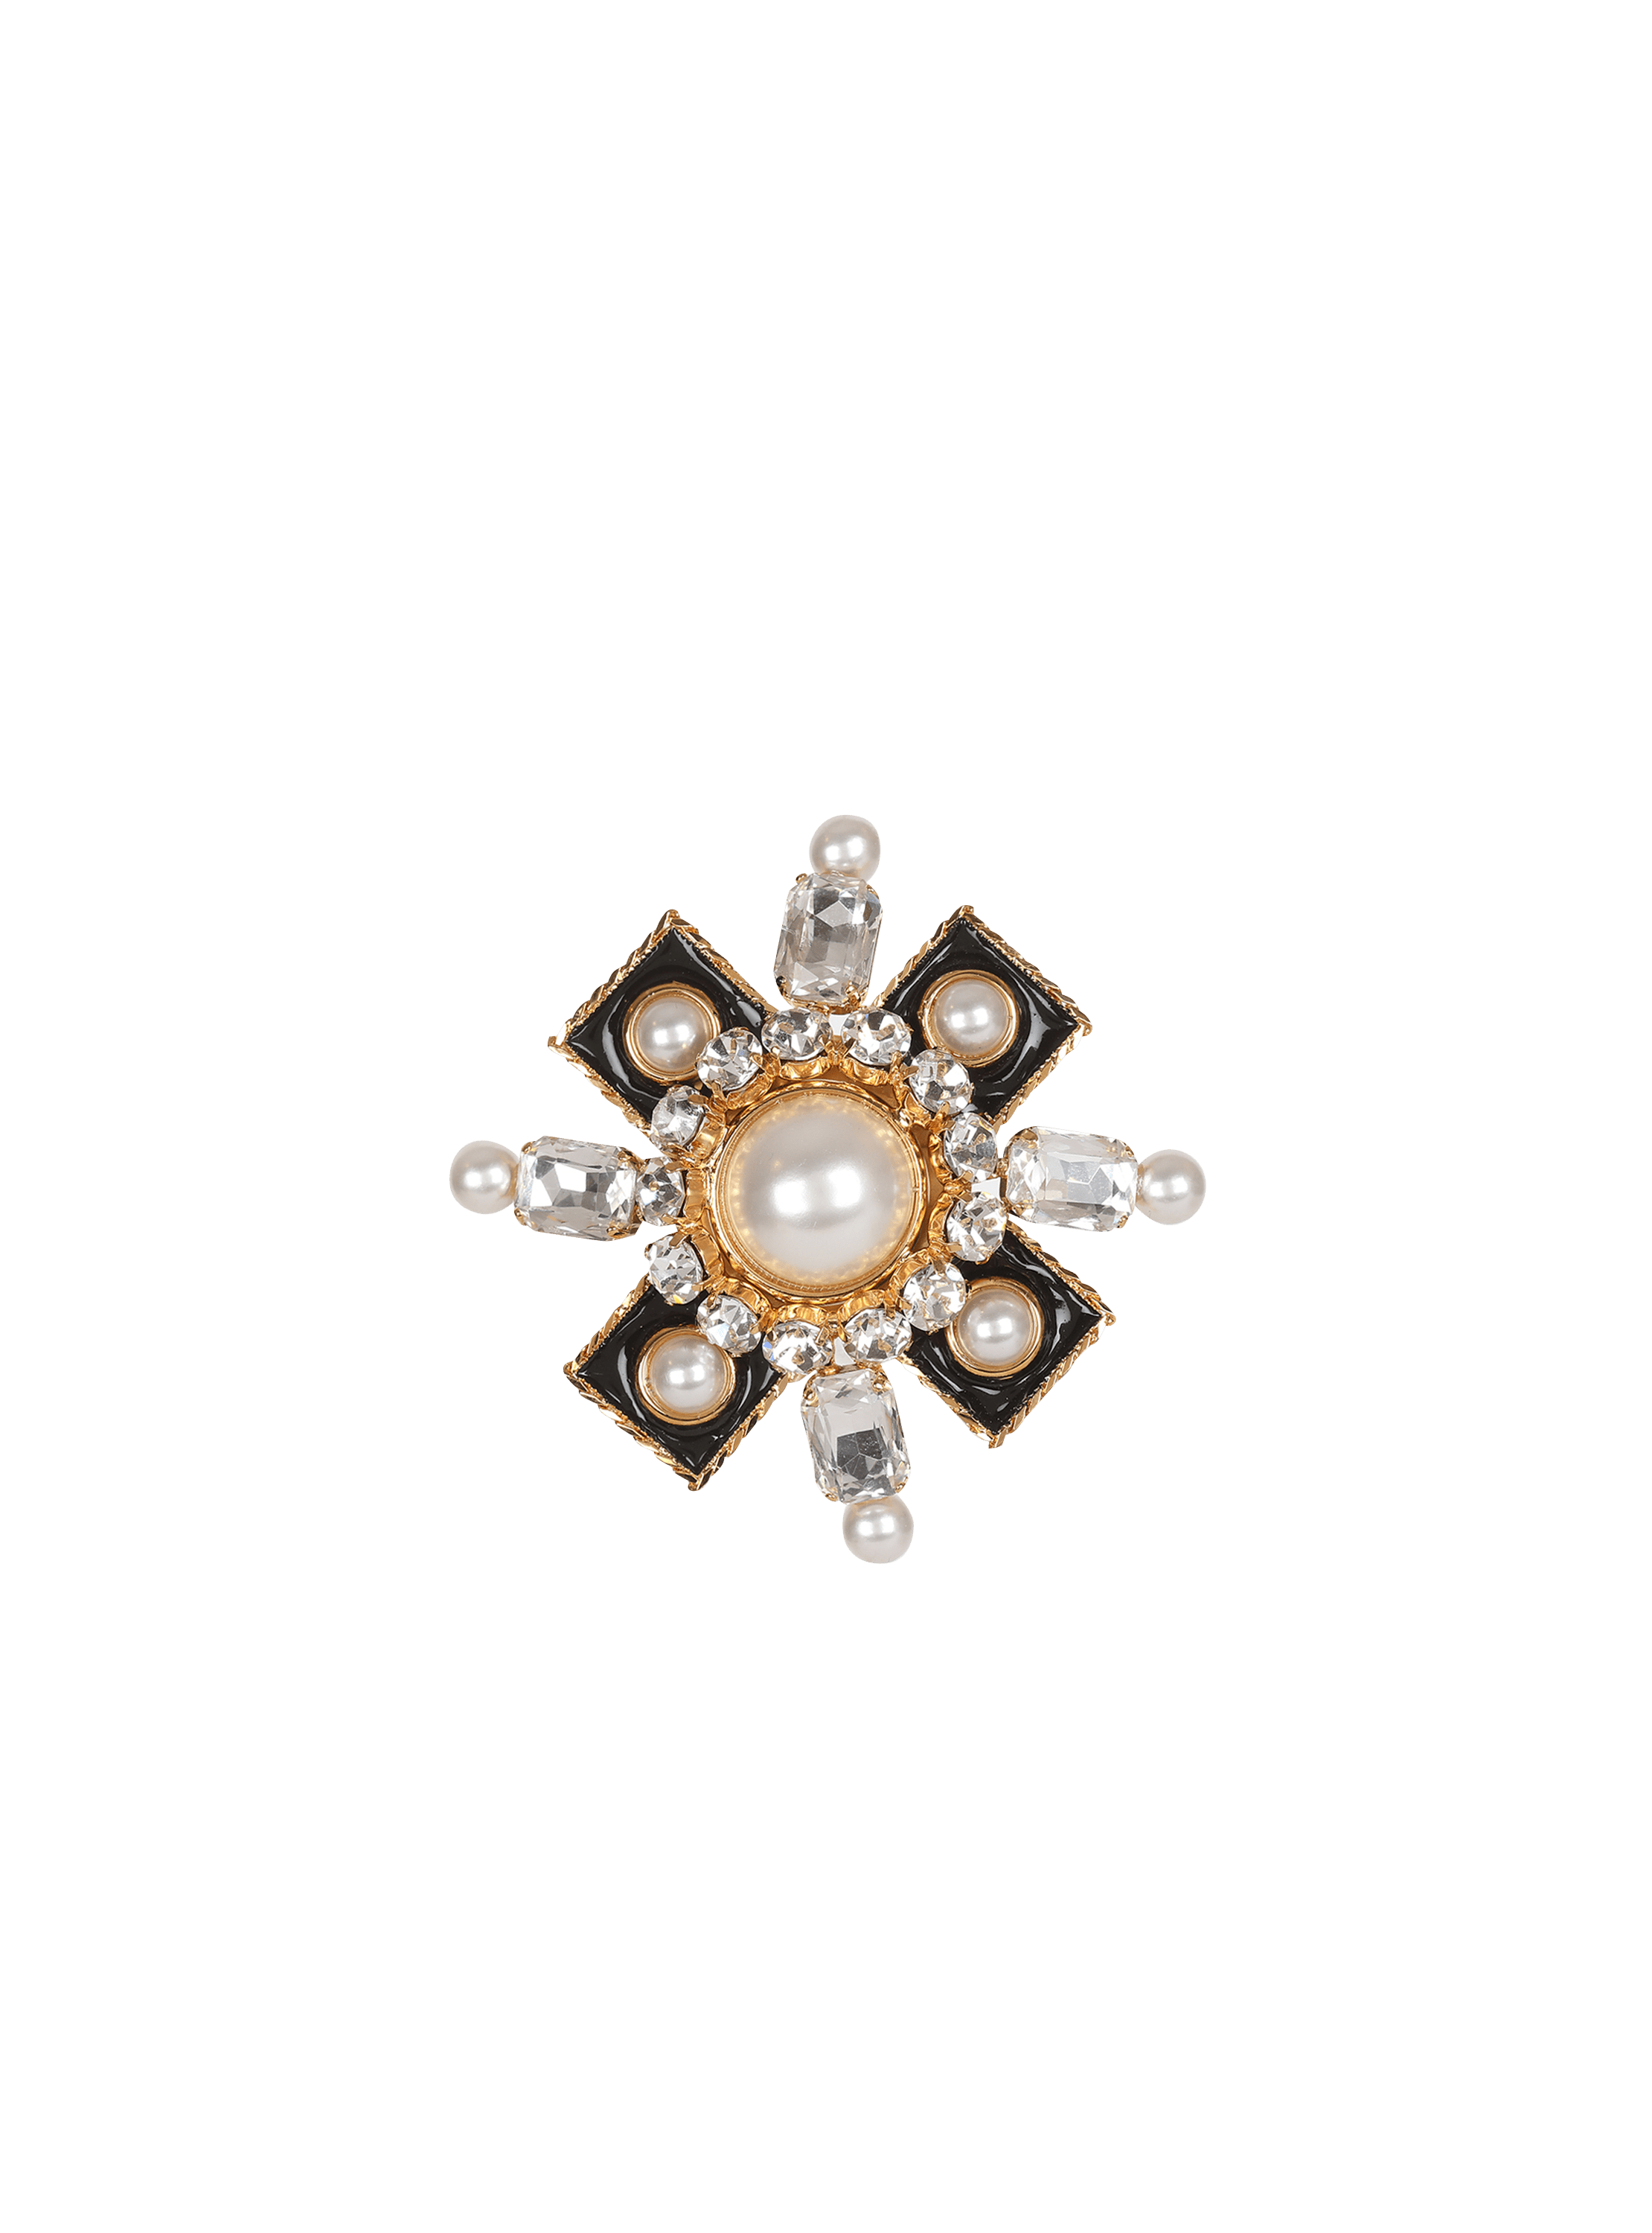 Metal cross-shaped brooch with pearls and rhinestones